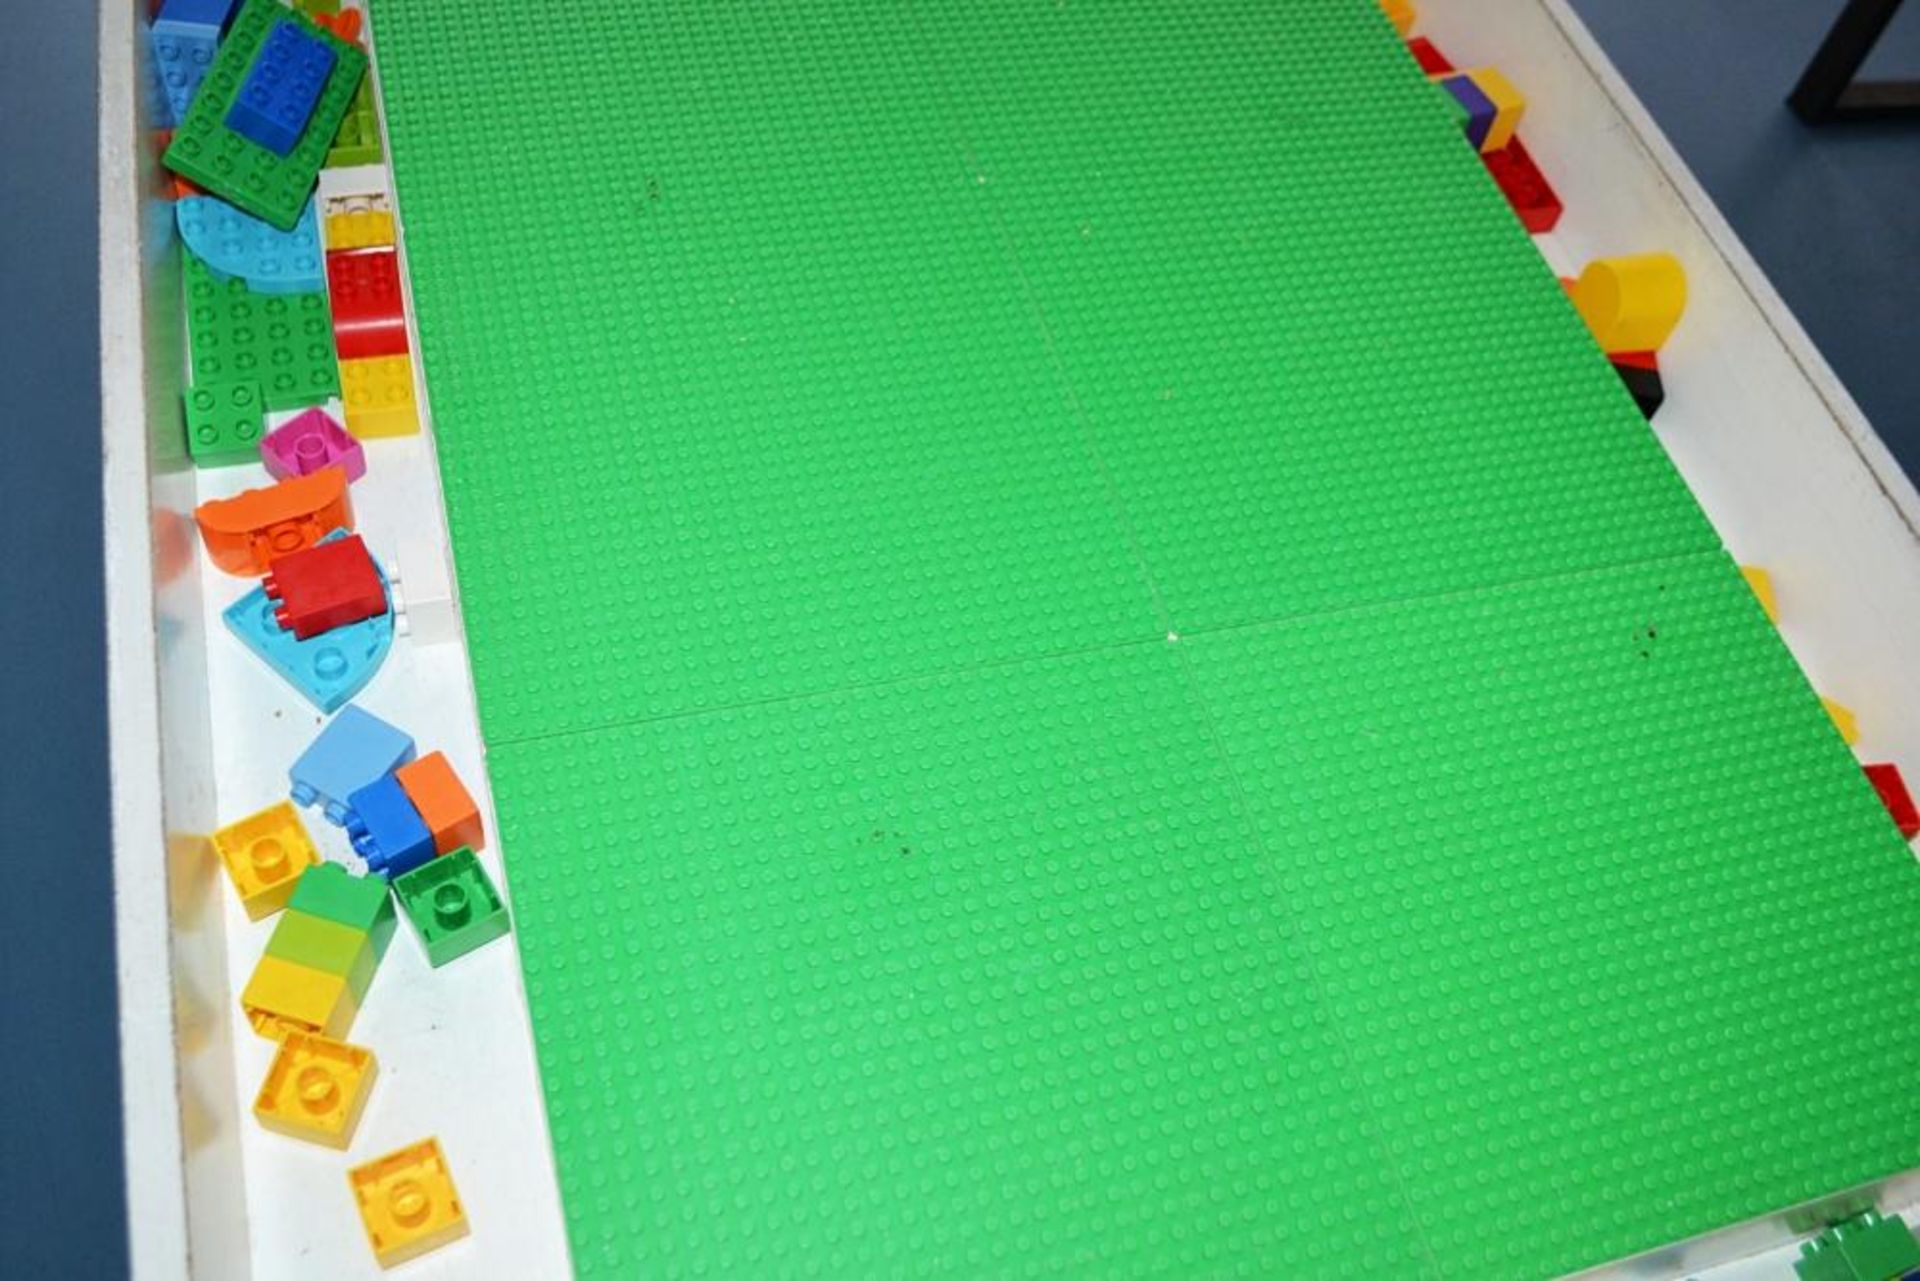 1 x Large Lego Table With Storage Trough - CL425 - Location: Altrincham WA14 - Image 5 of 5